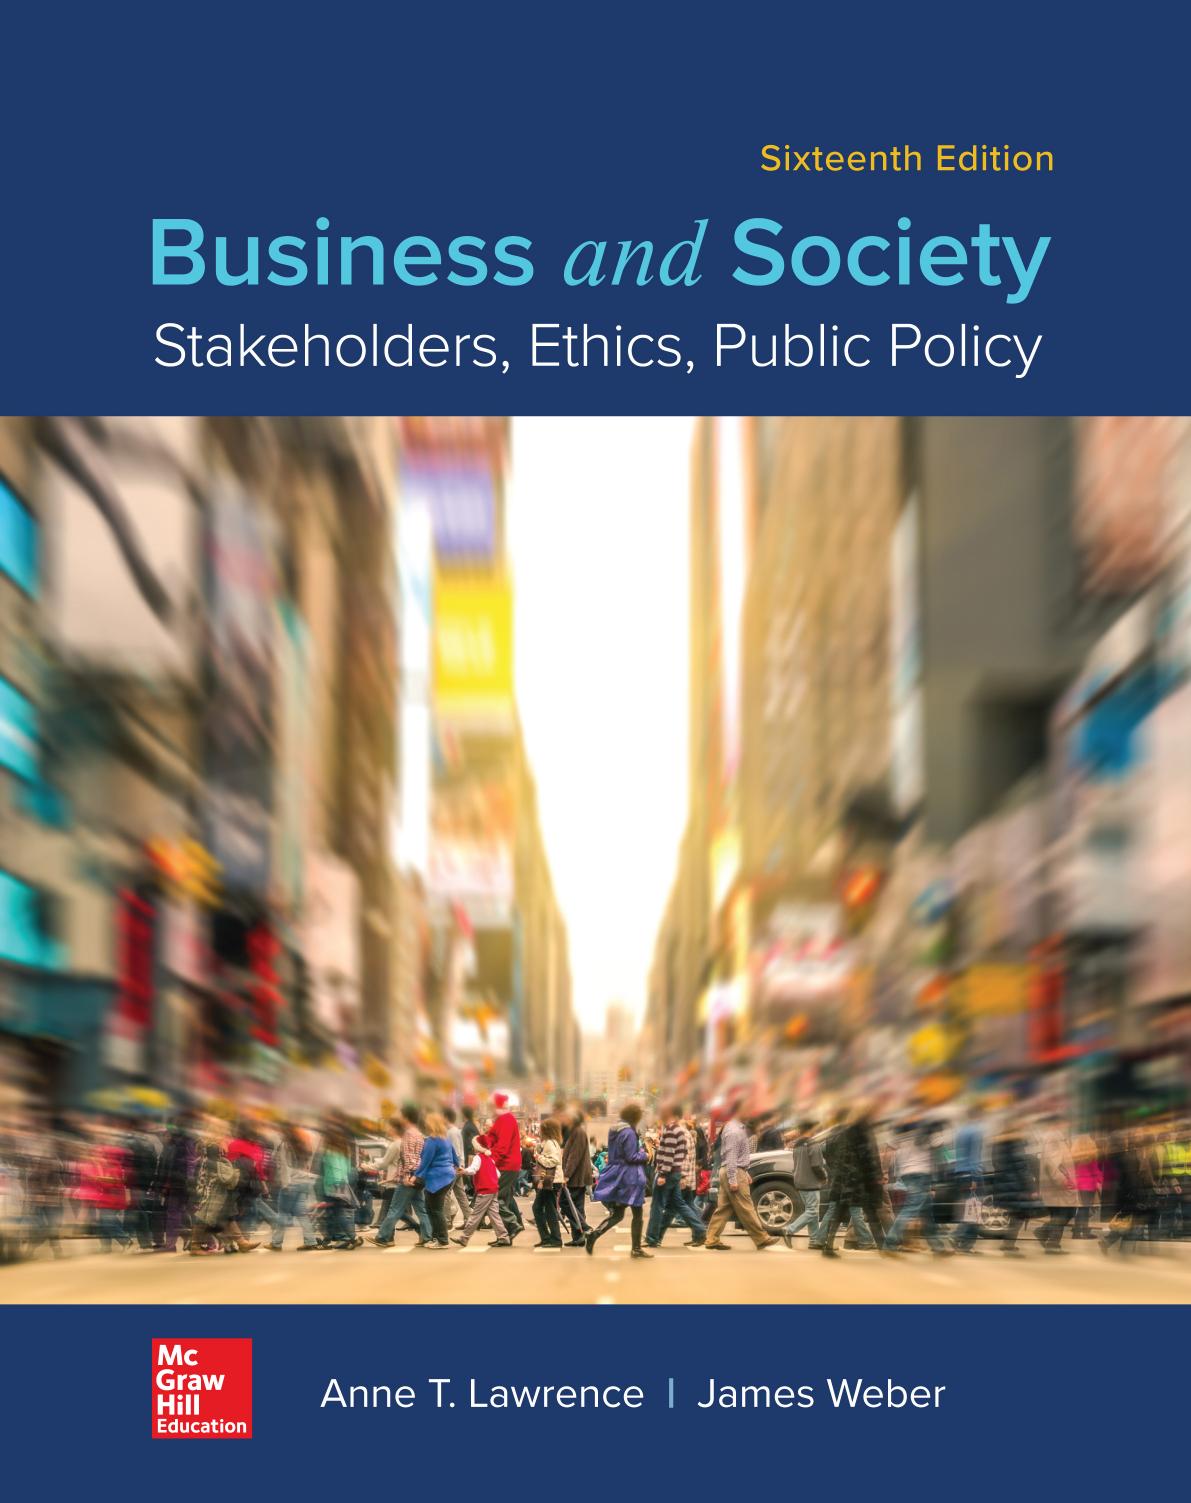 Business and society  stakeholders, ethics, public policy by Anne T. Lawrence (Business ethics professor) James Weber  16th ed 2